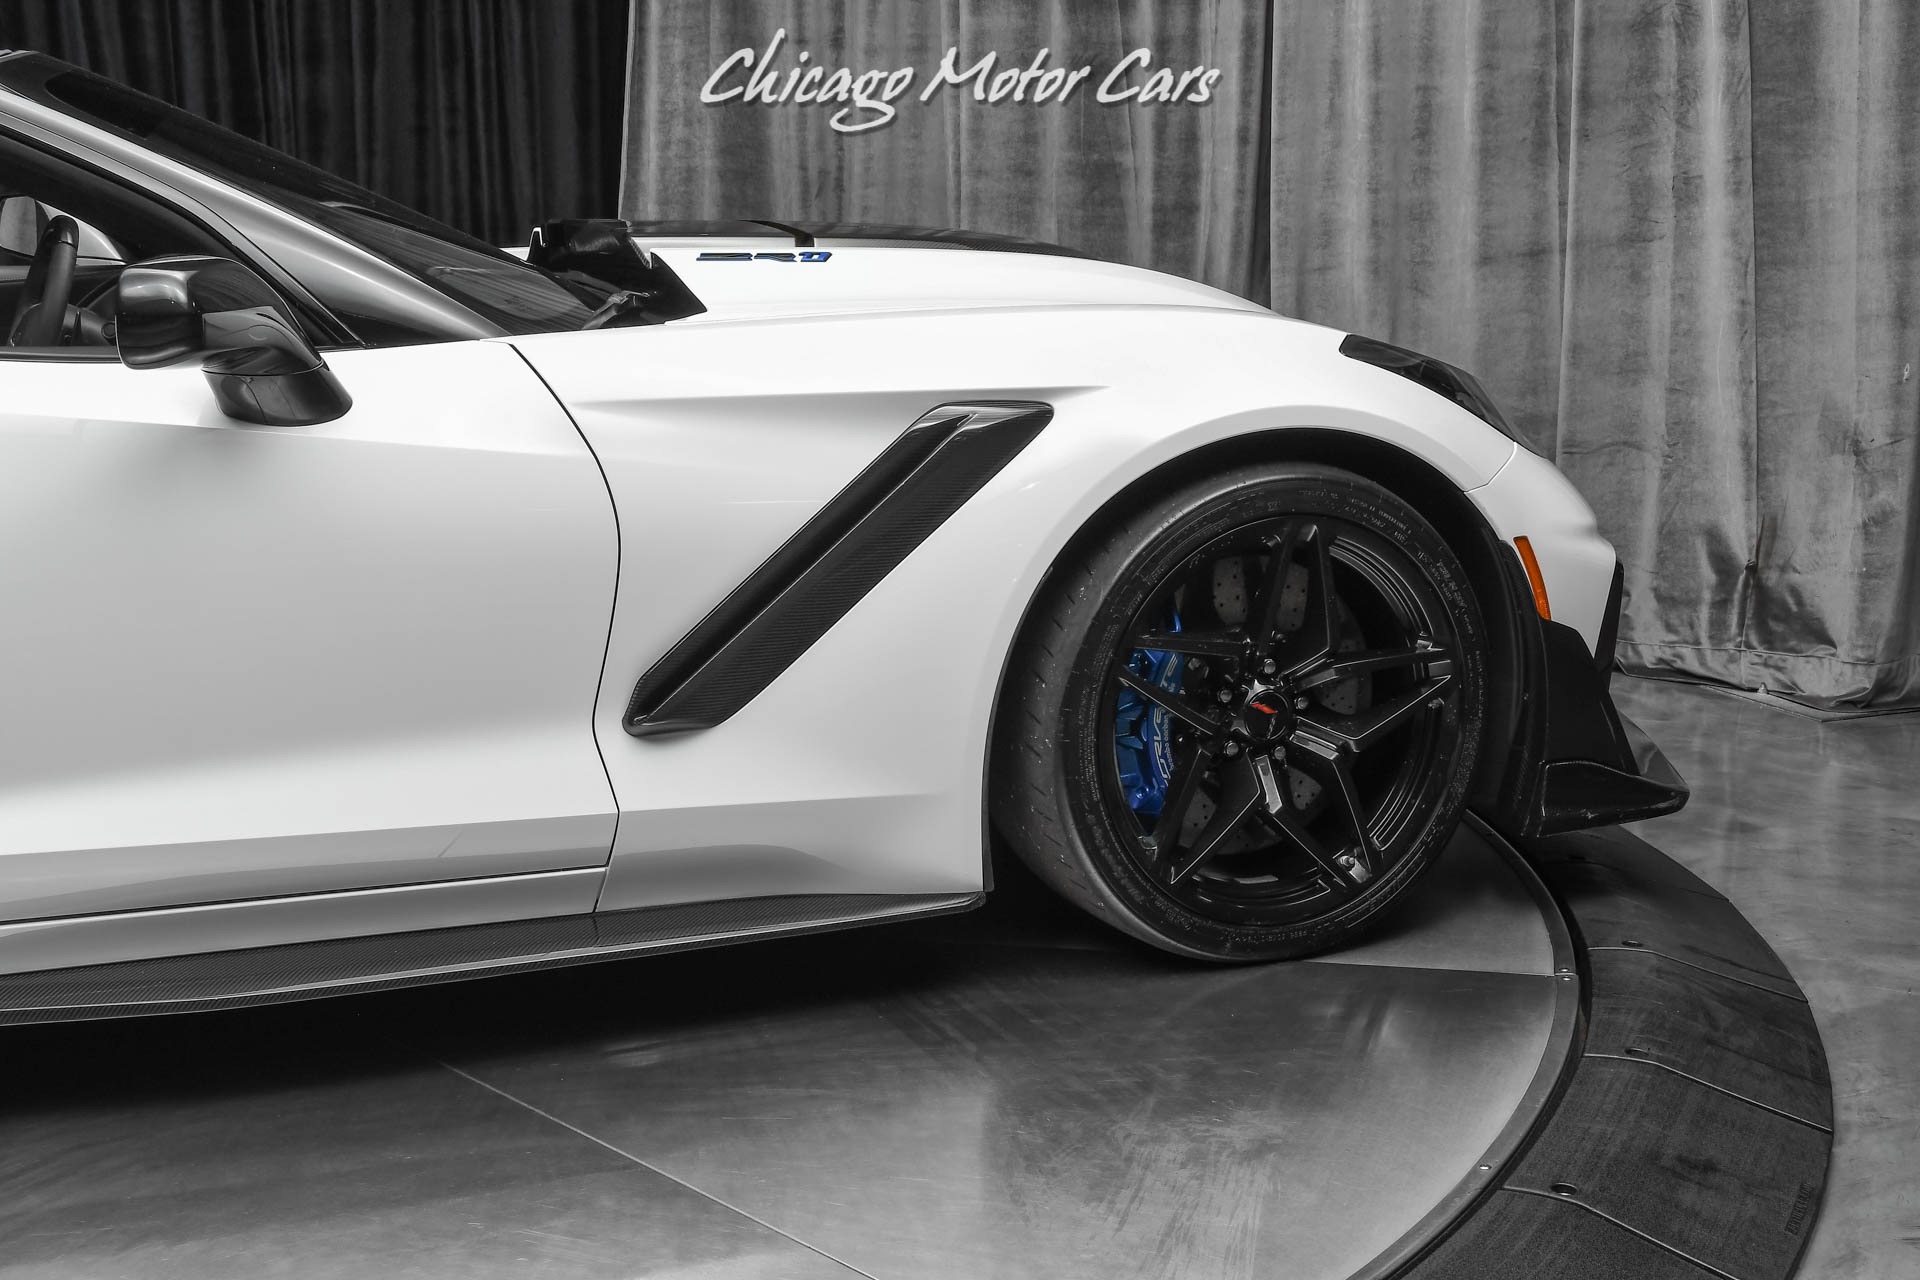 Used-2019-Chevrolet-Corvette-ZR1-3ZR-wZTK-Weapon-X-X900-Package-Stage-3-RARE-Low-Mile-ZR1